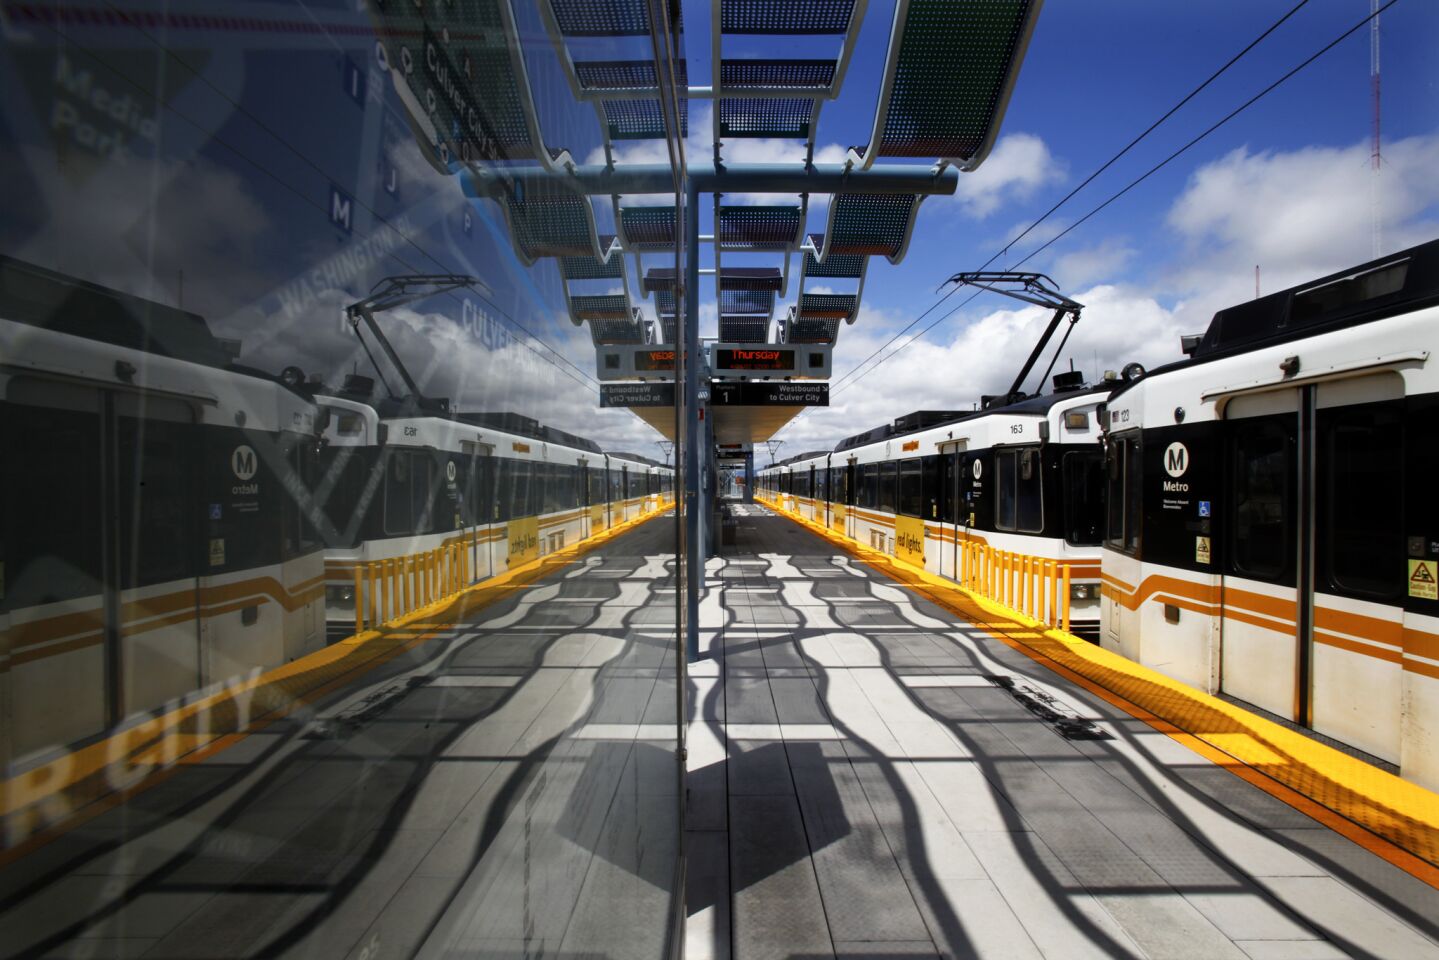 The newest Expo Line trains are reflected on a glass wall at the La Cienega Station after making several practice runs on April 26, 2012. The Expo Line runs between Los Angeles and the Westside and cost $930 million to complete. REVIEW: Lackluster Expo Line reflects Metro's weak grasp of design